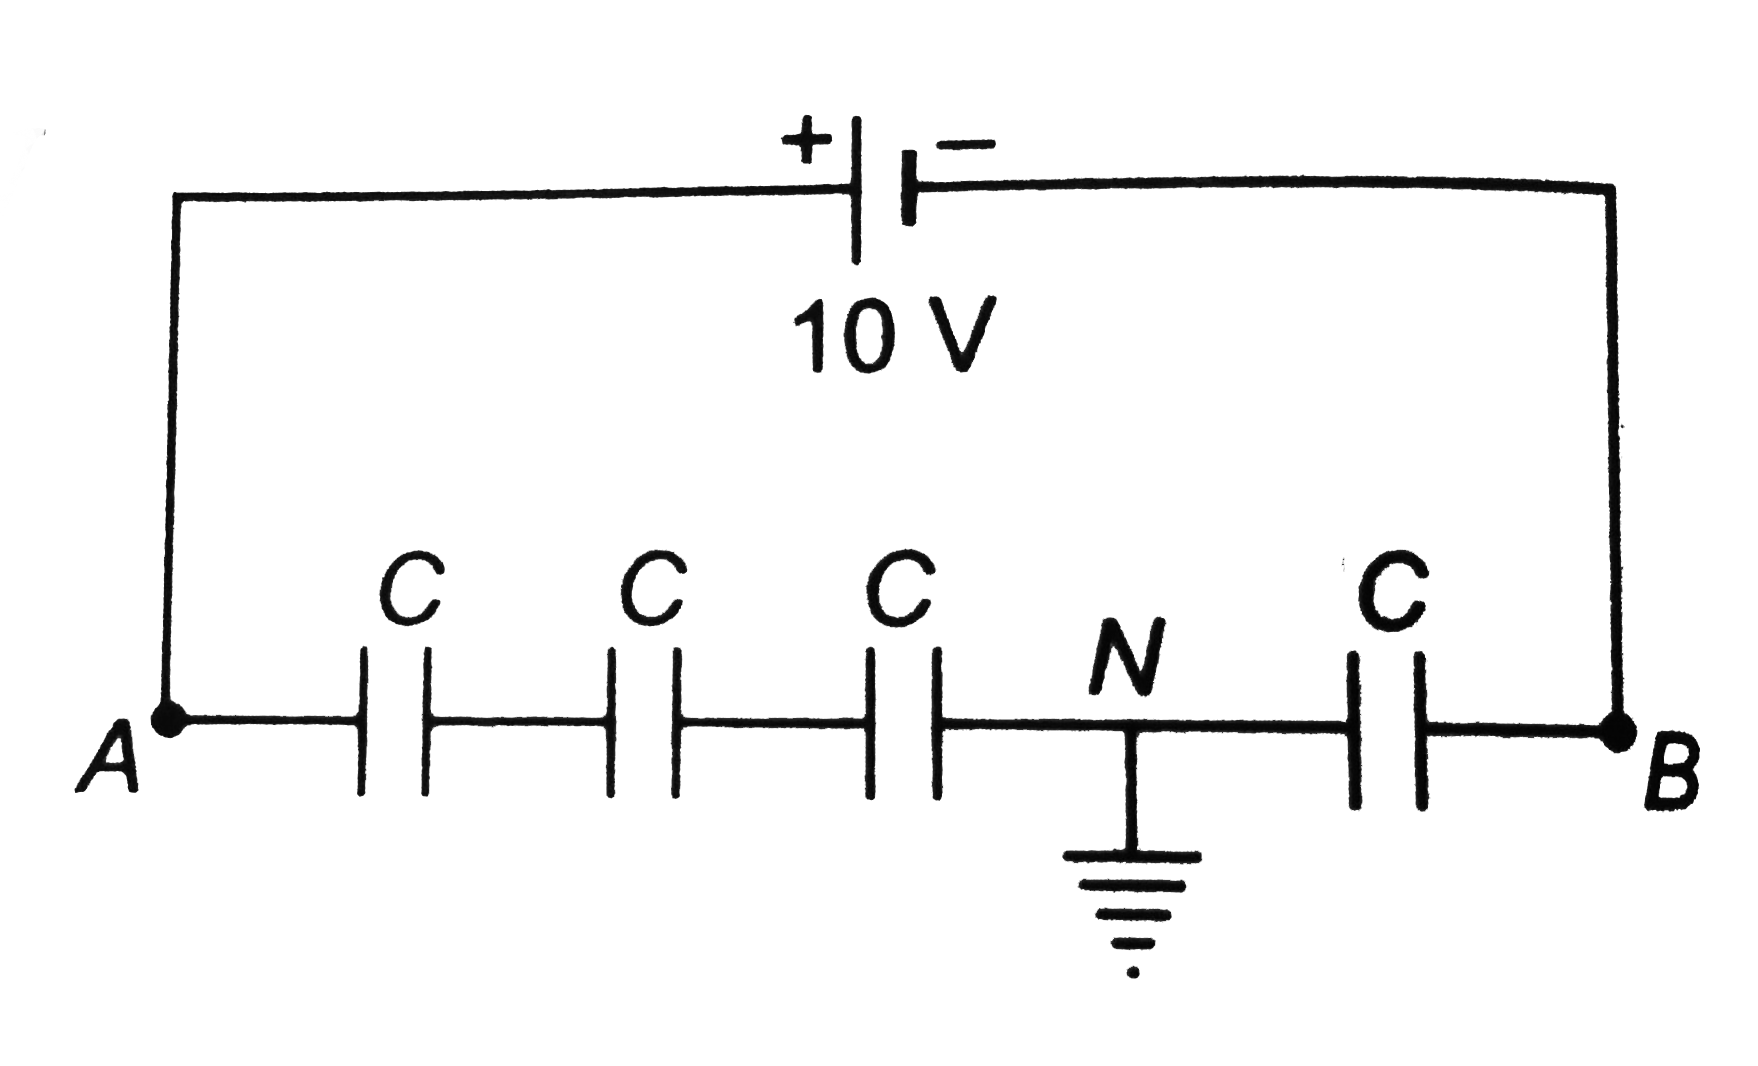 Four identical capacitors are connected in series with  a 10 V battery as shown in the figure. The point N is earthed. The potentials of points A and B are